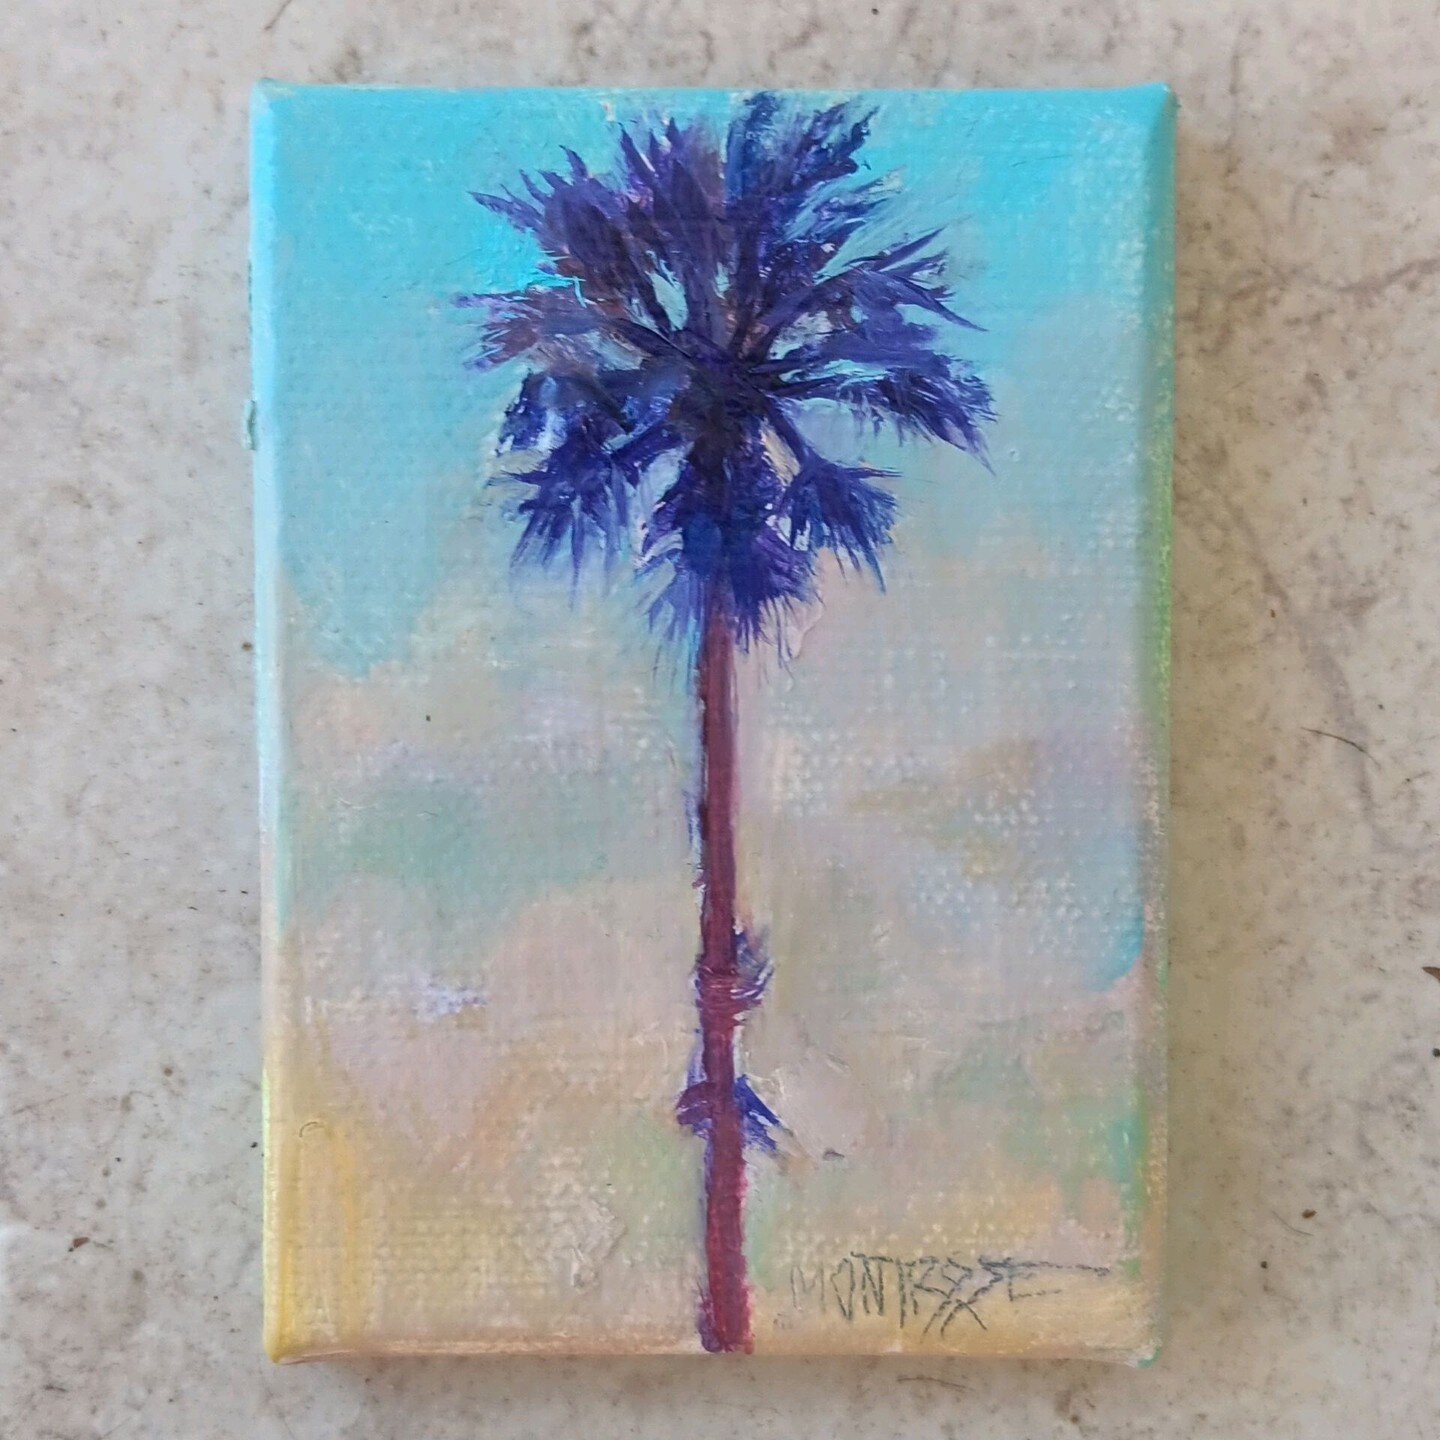 21/100 
I LOVE this mini. There's something about a straight on composition that turns a palm tree into the main character.
.
@dothe100dayproject
#the100dayproject #the100dayproject2024#colorfuloilpainting #sandiegoart #artisticdecoration #palmtreepa